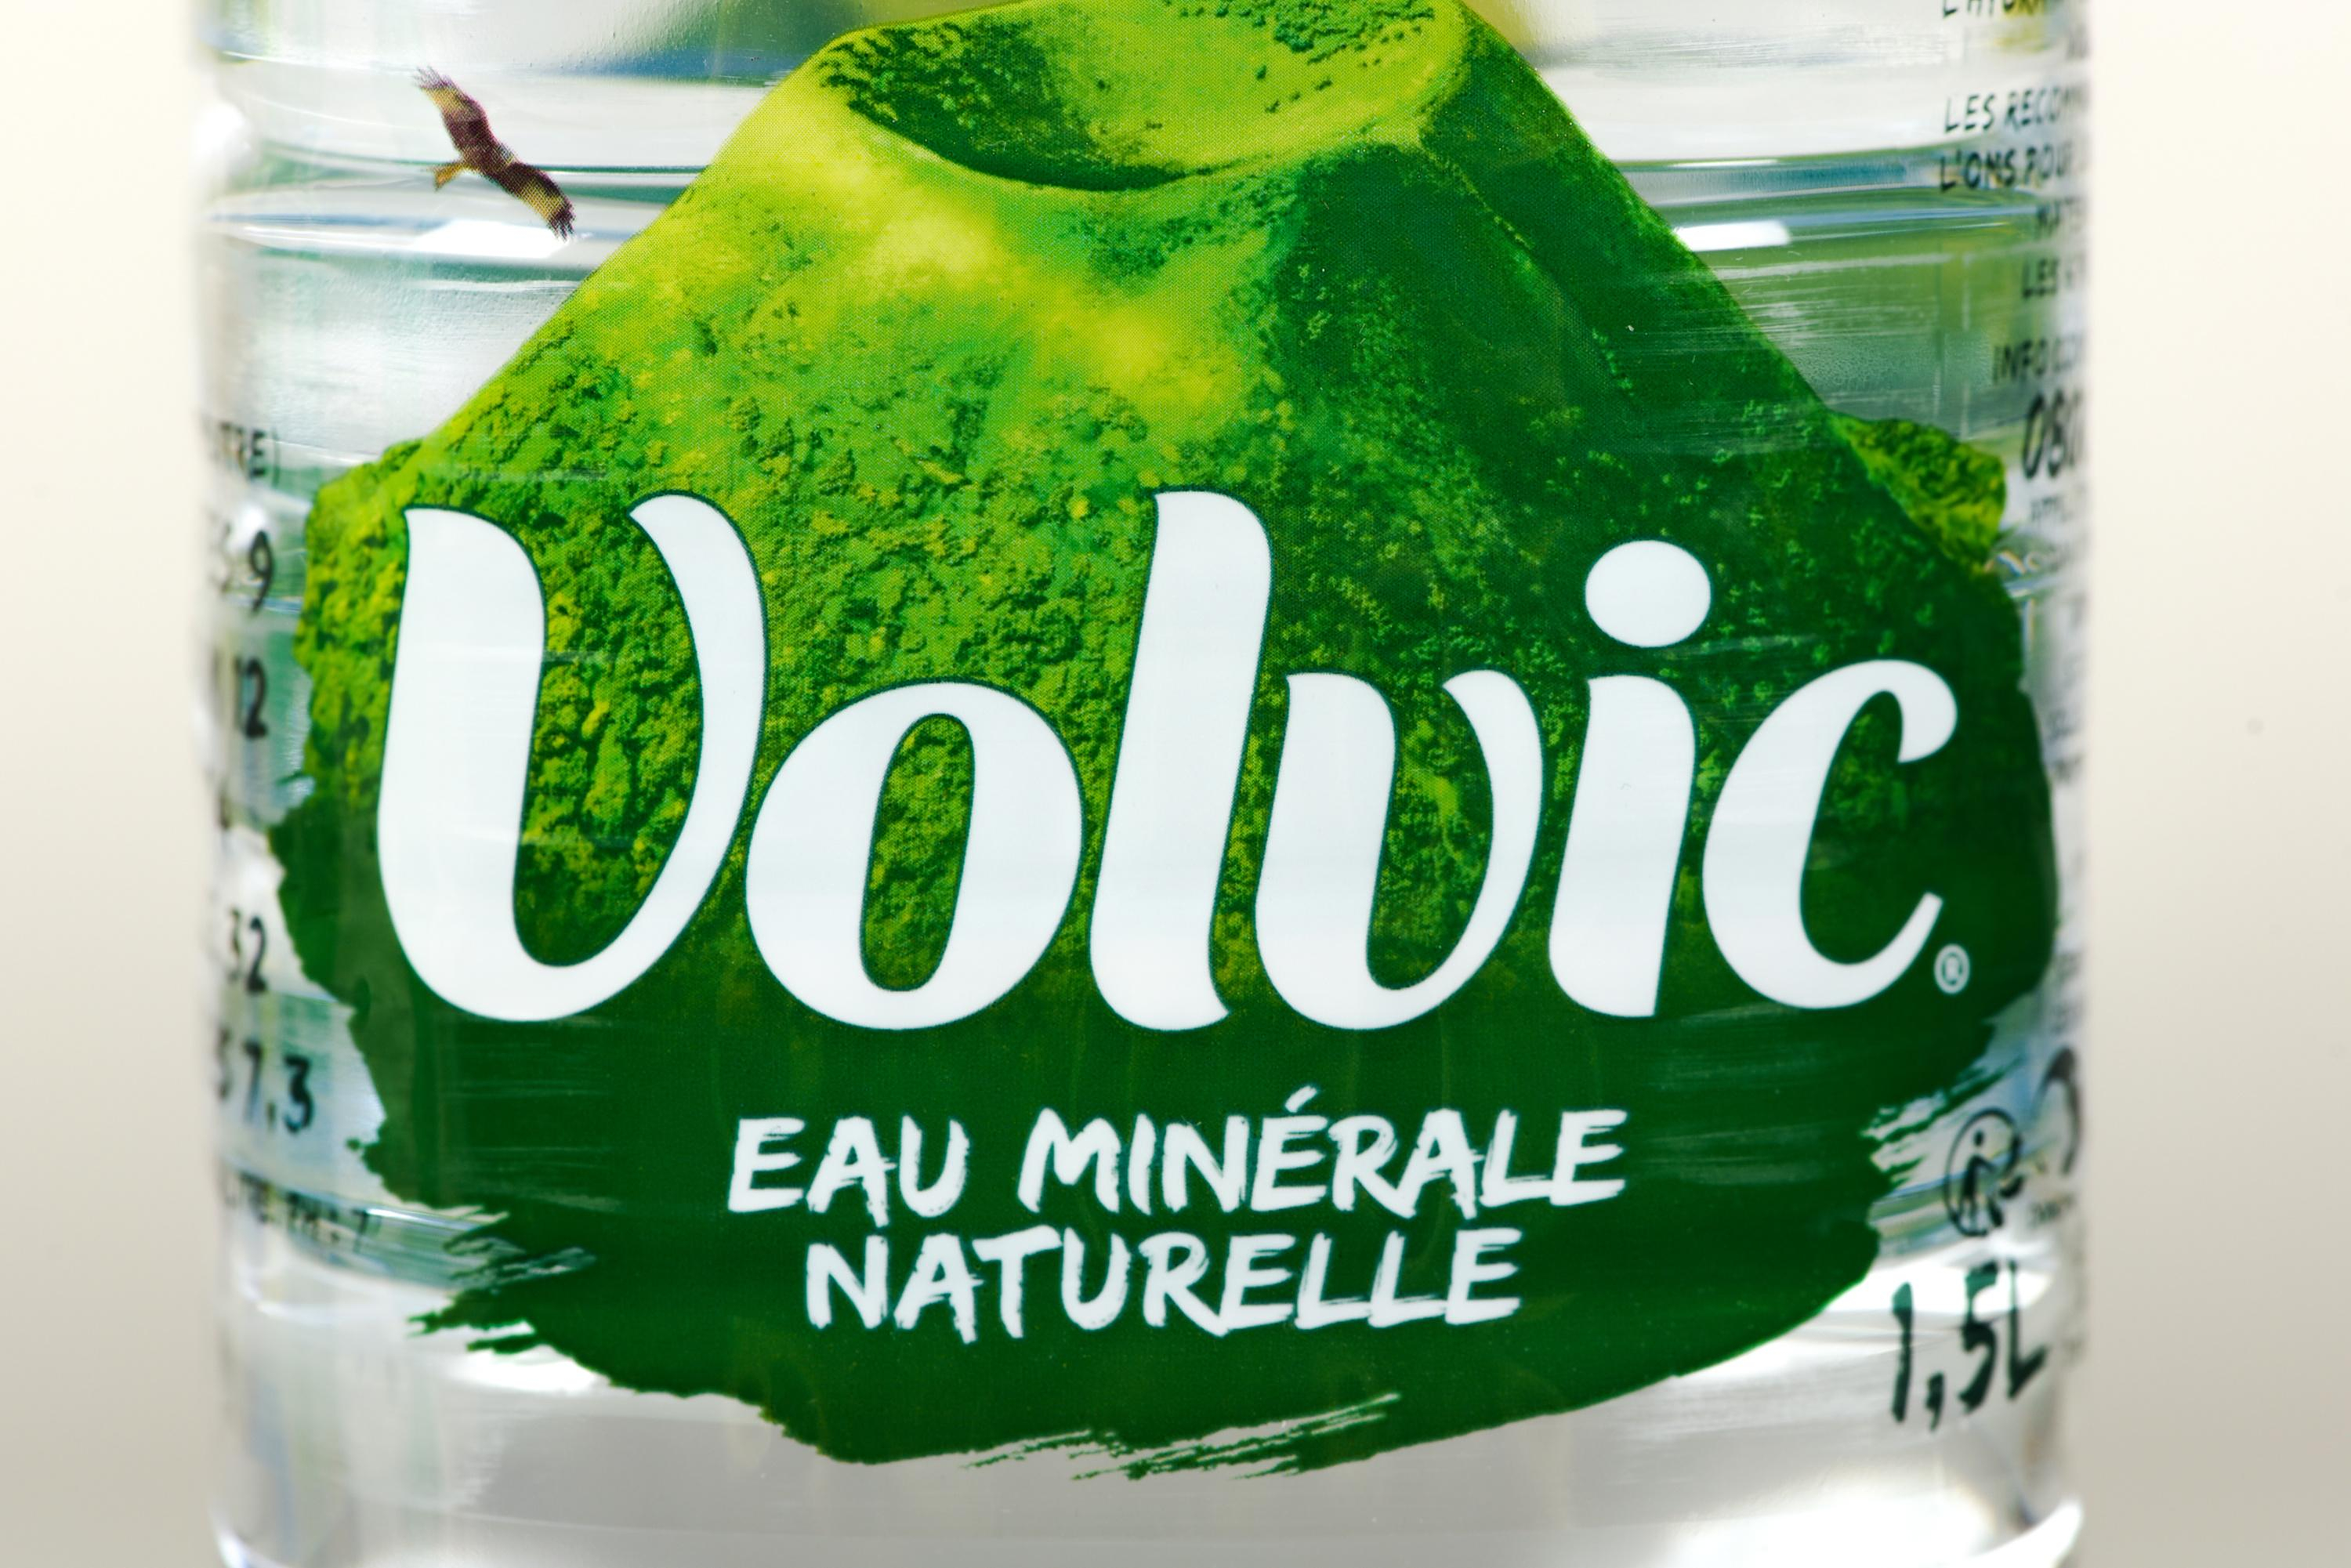 Volvic factory shut down after “an act of malicious intent”: production can resume “at the earliest” on Friday